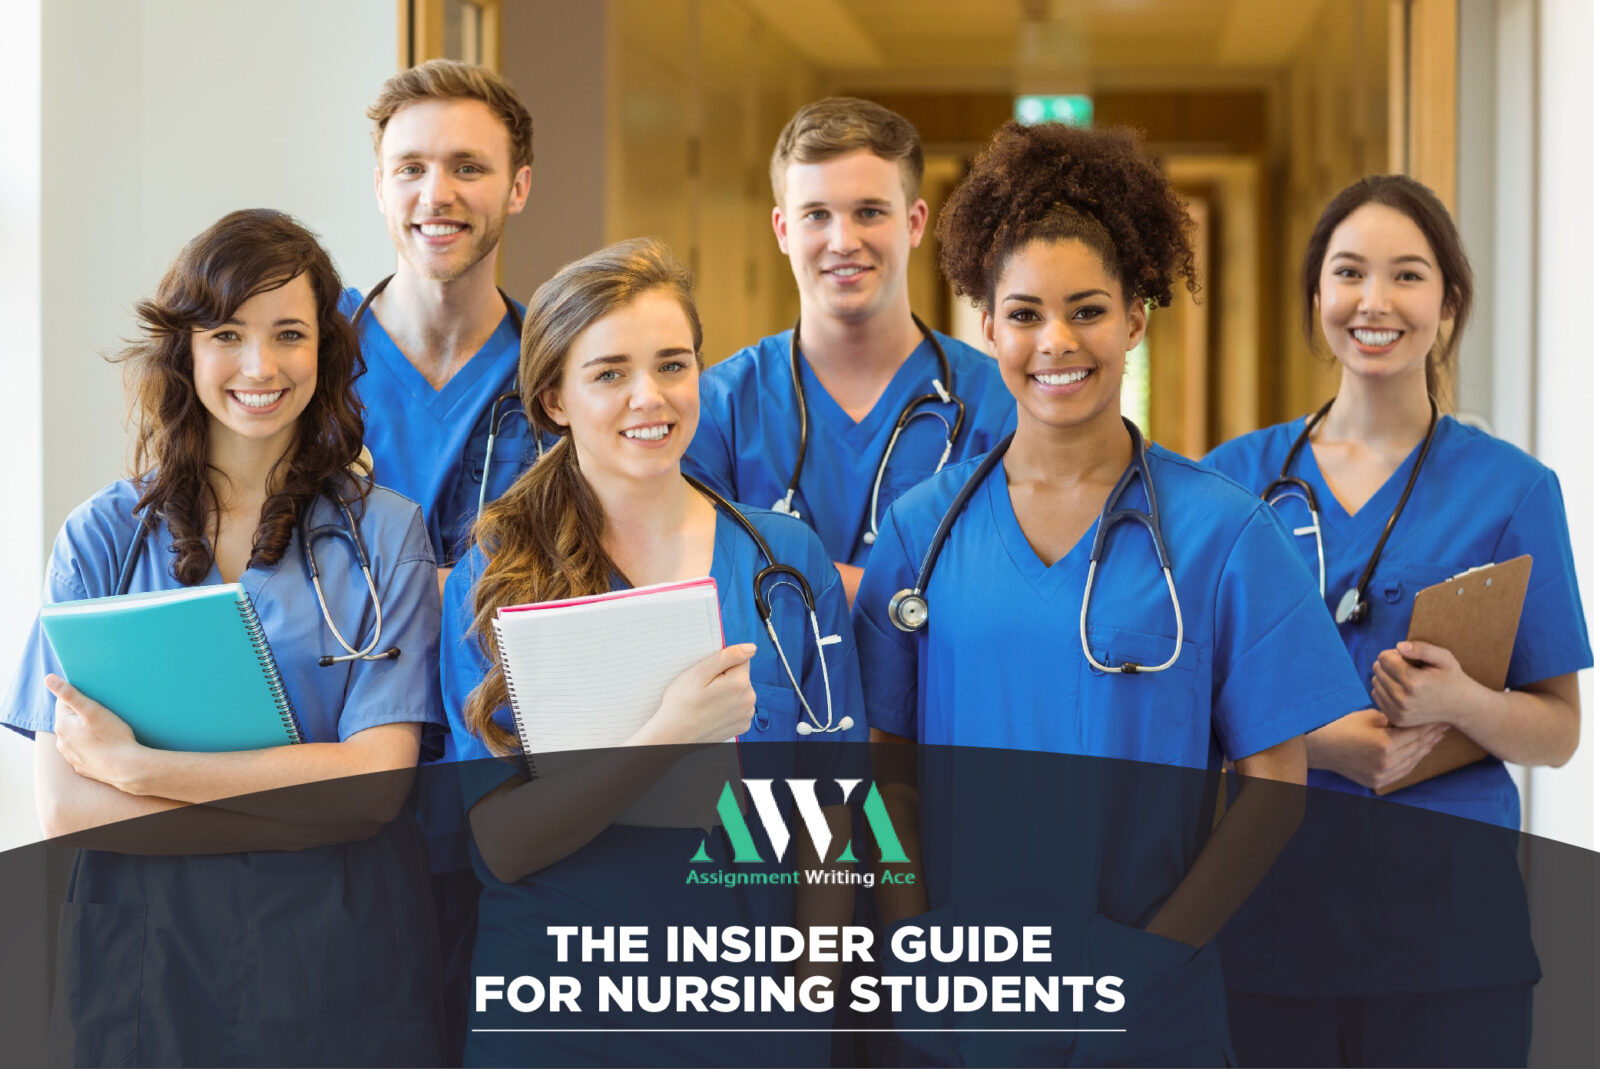 The Insider Guide for Nursing Students